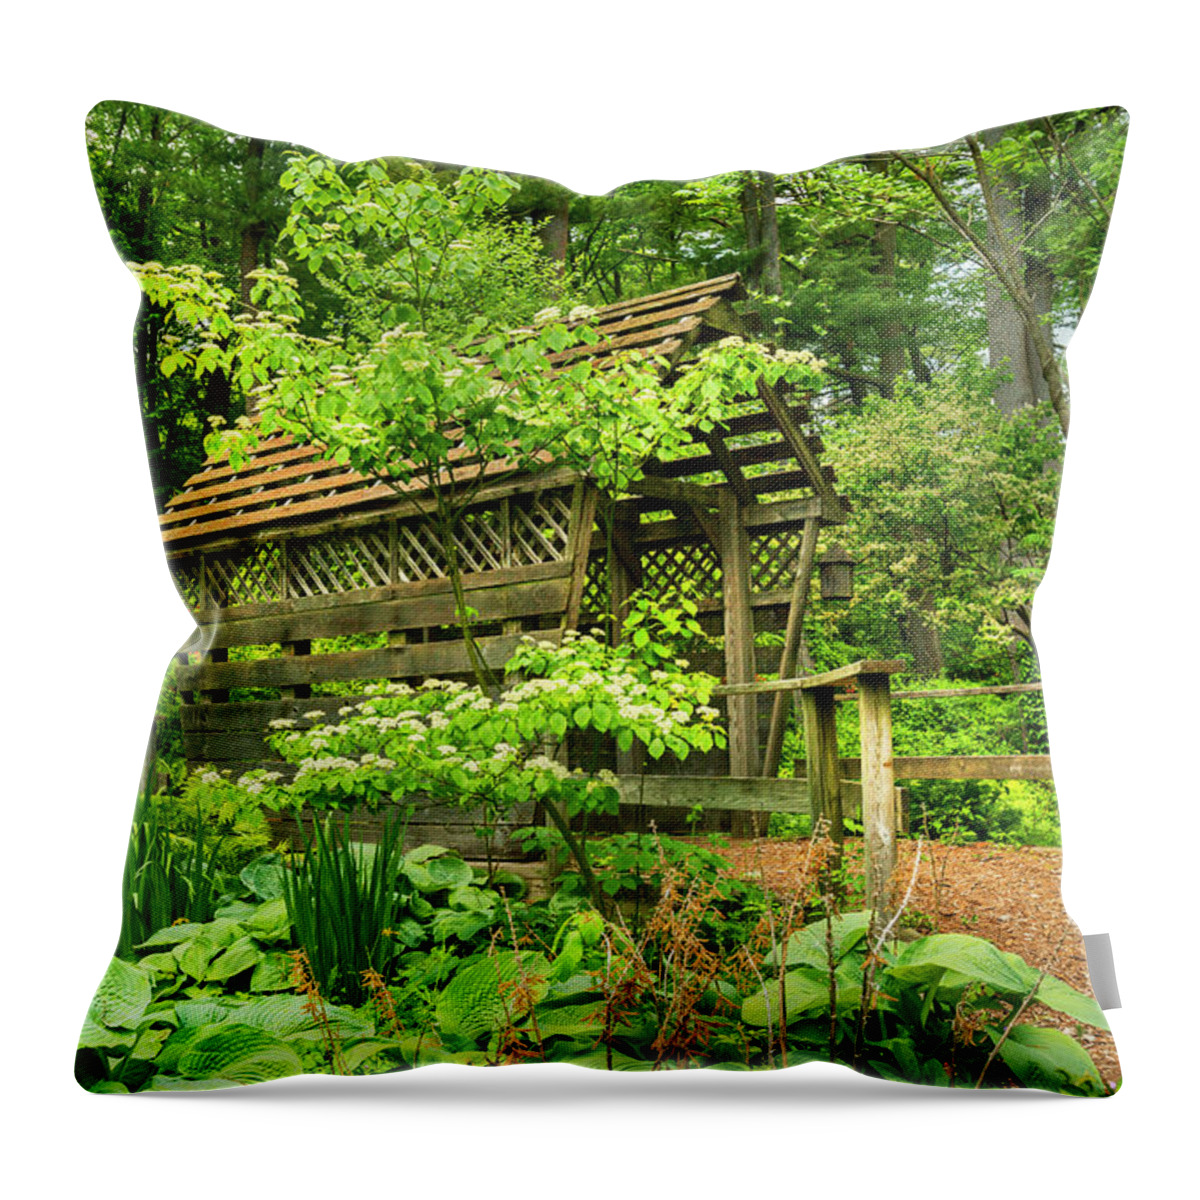 Estock Throw Pillow featuring the digital art Covered Bridge, Oyster Bay, Ny by Claudia Uripos